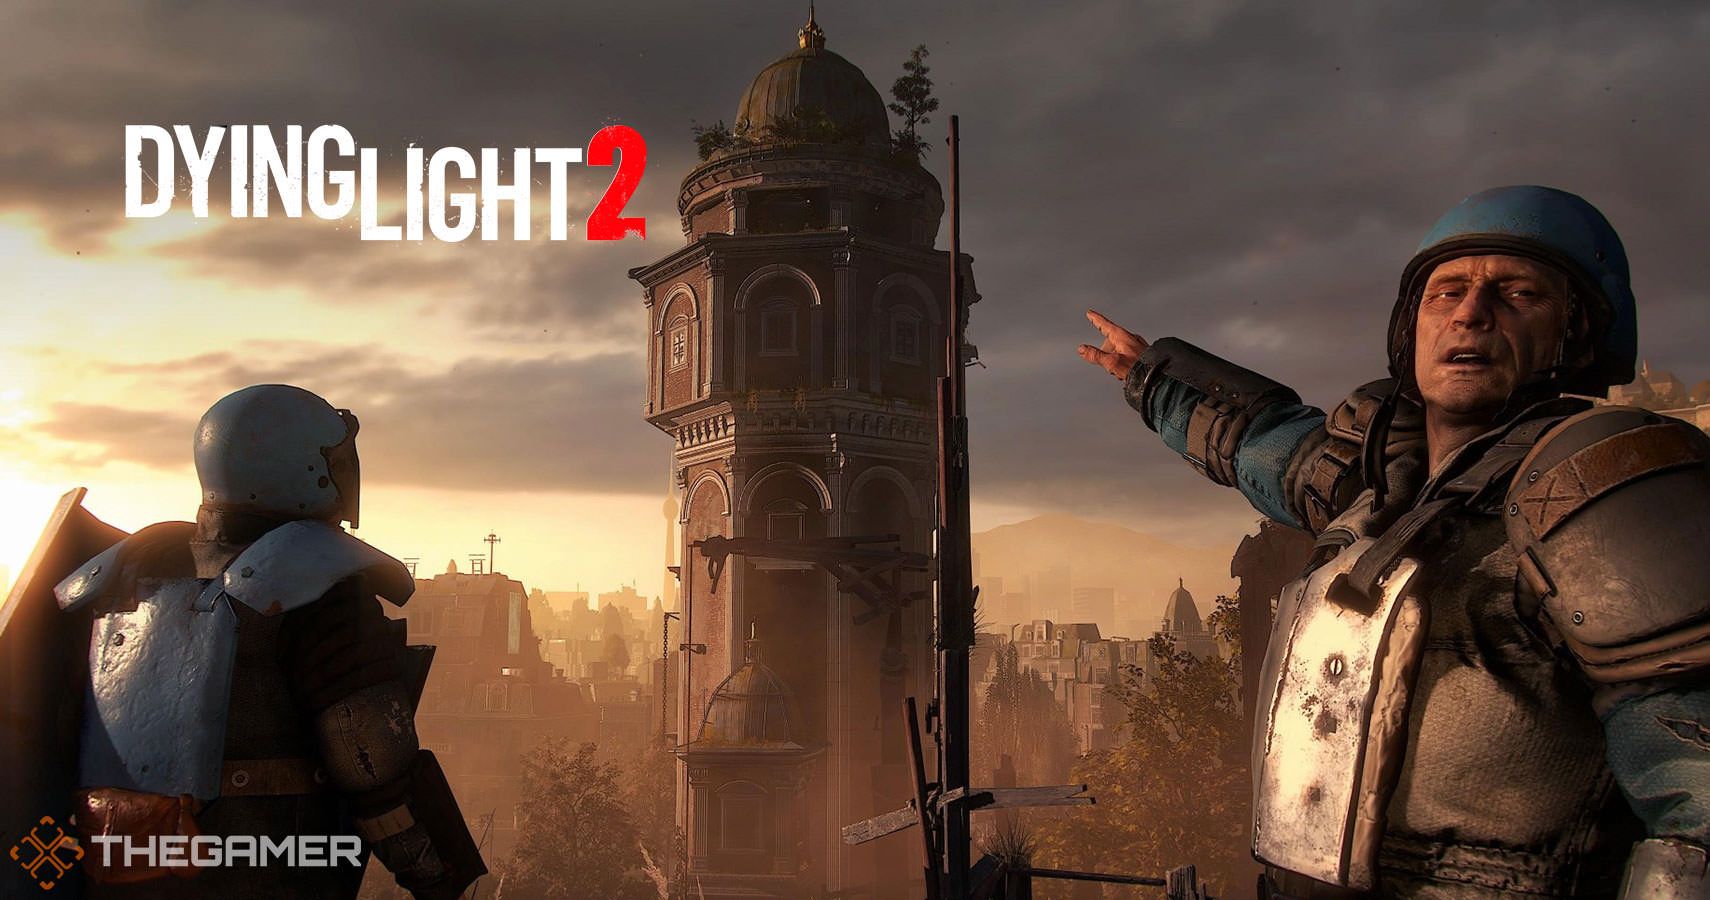 dying light coop requires steam overlay